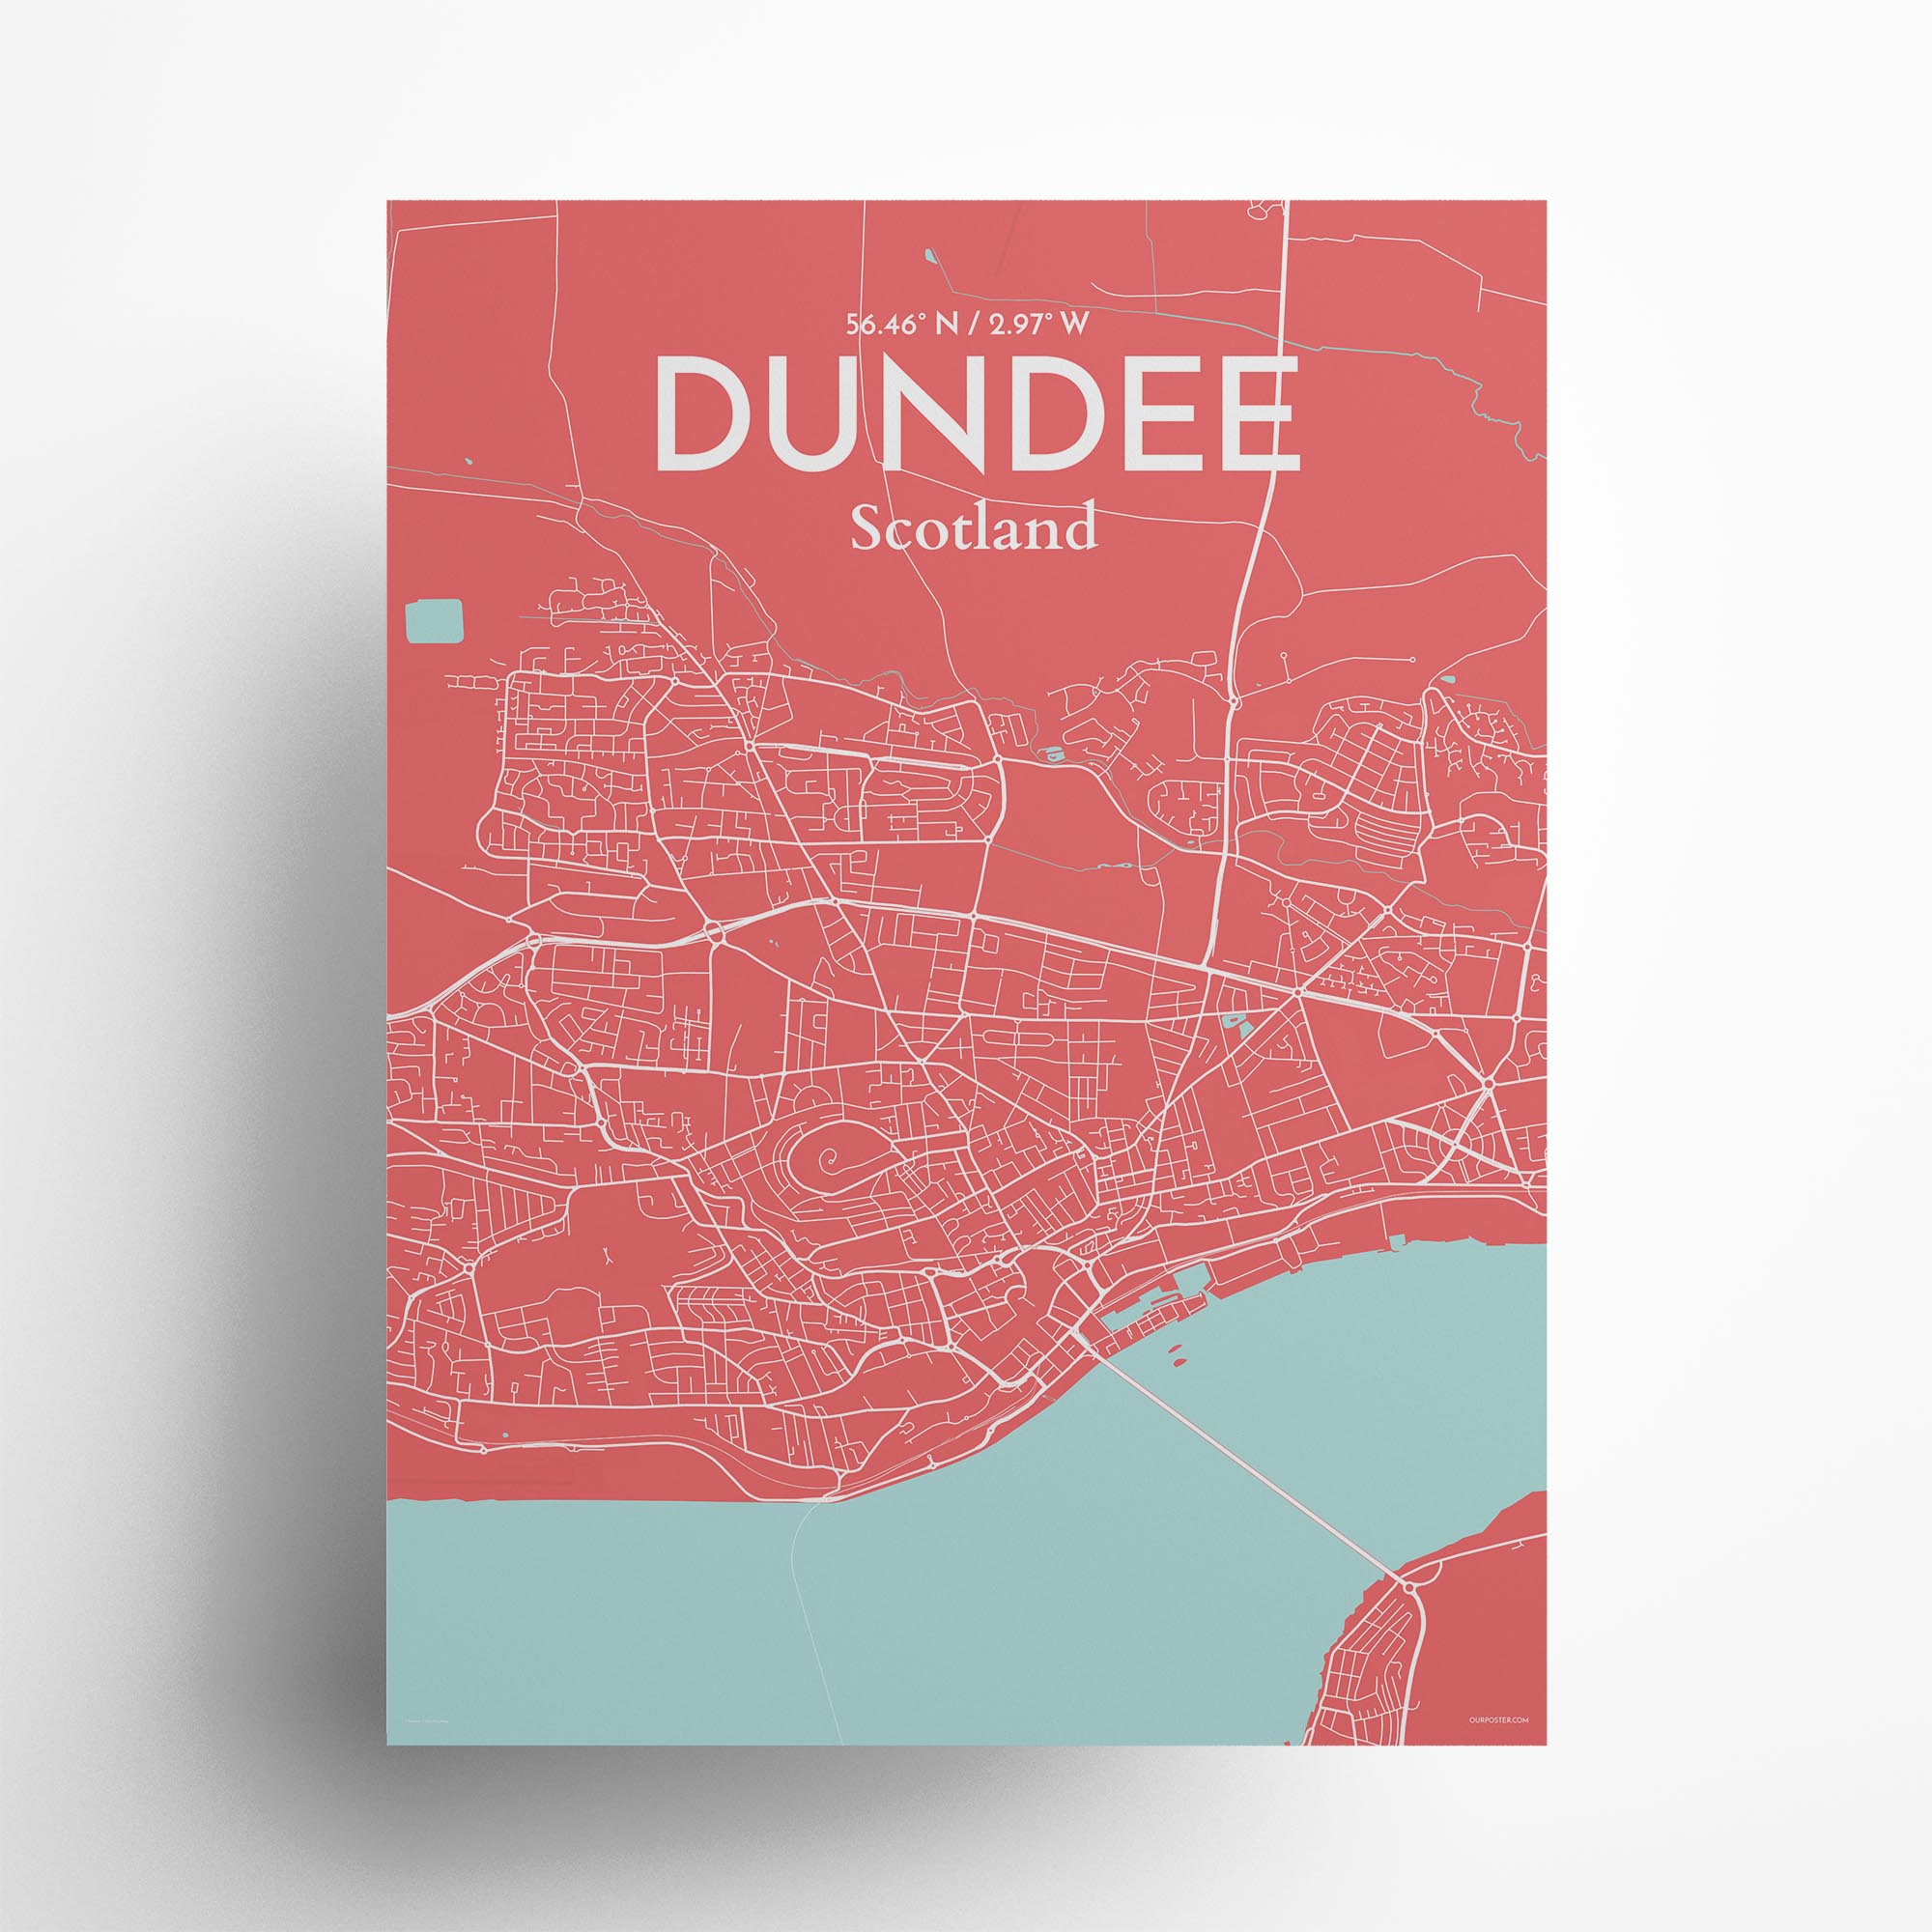 Dundee city map poster in Maritime of size 18" x 24"